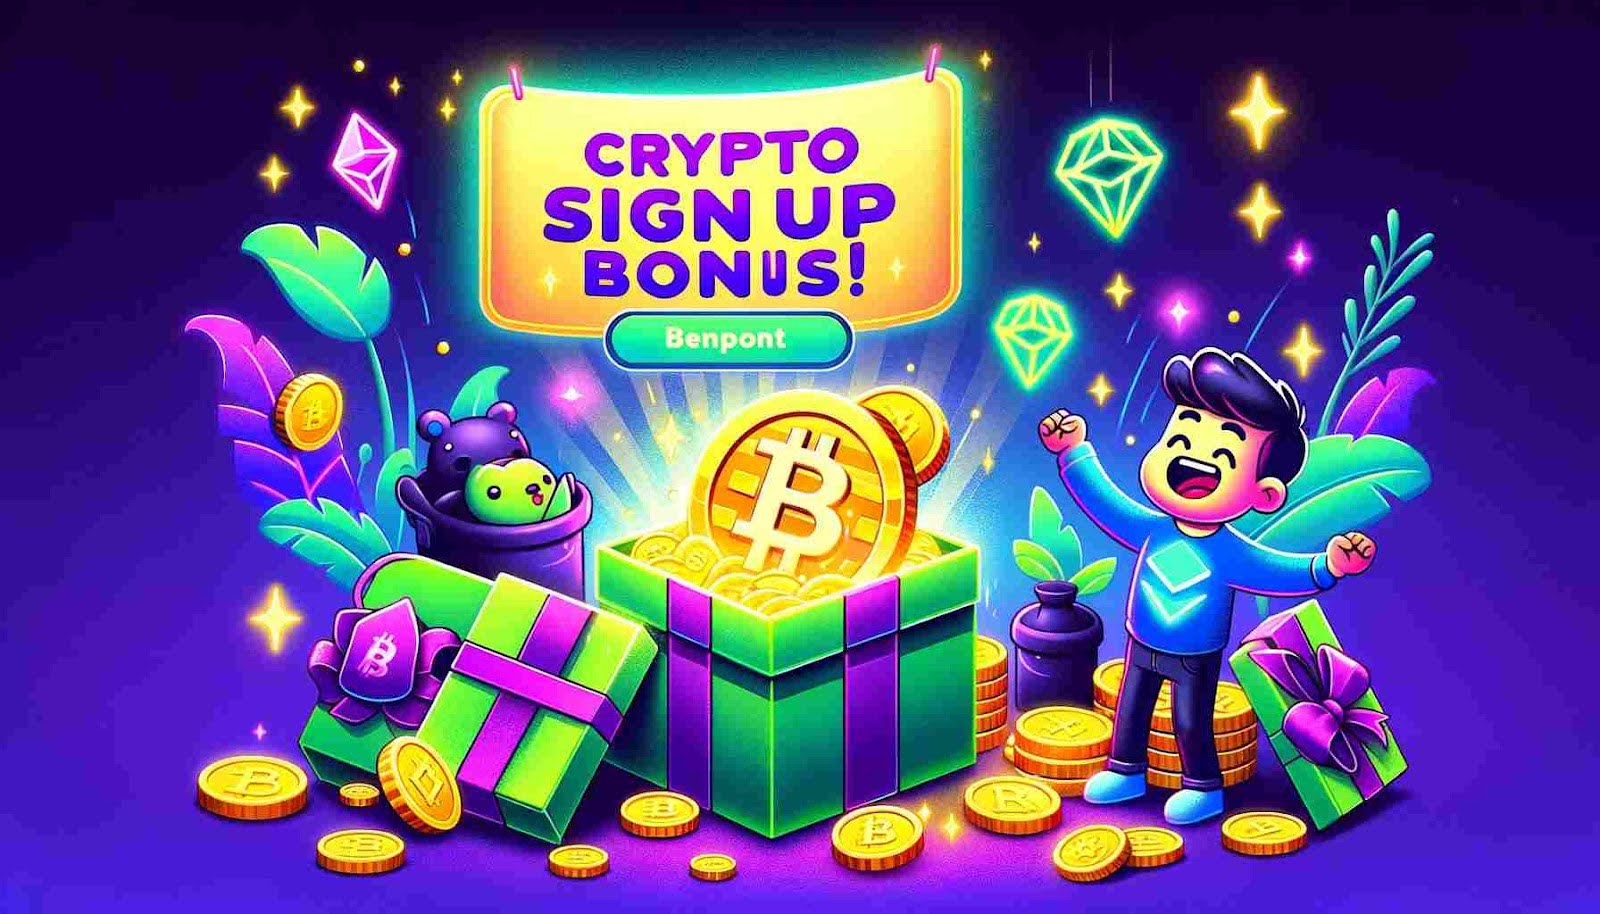 What is a Crypto Signup Bonus